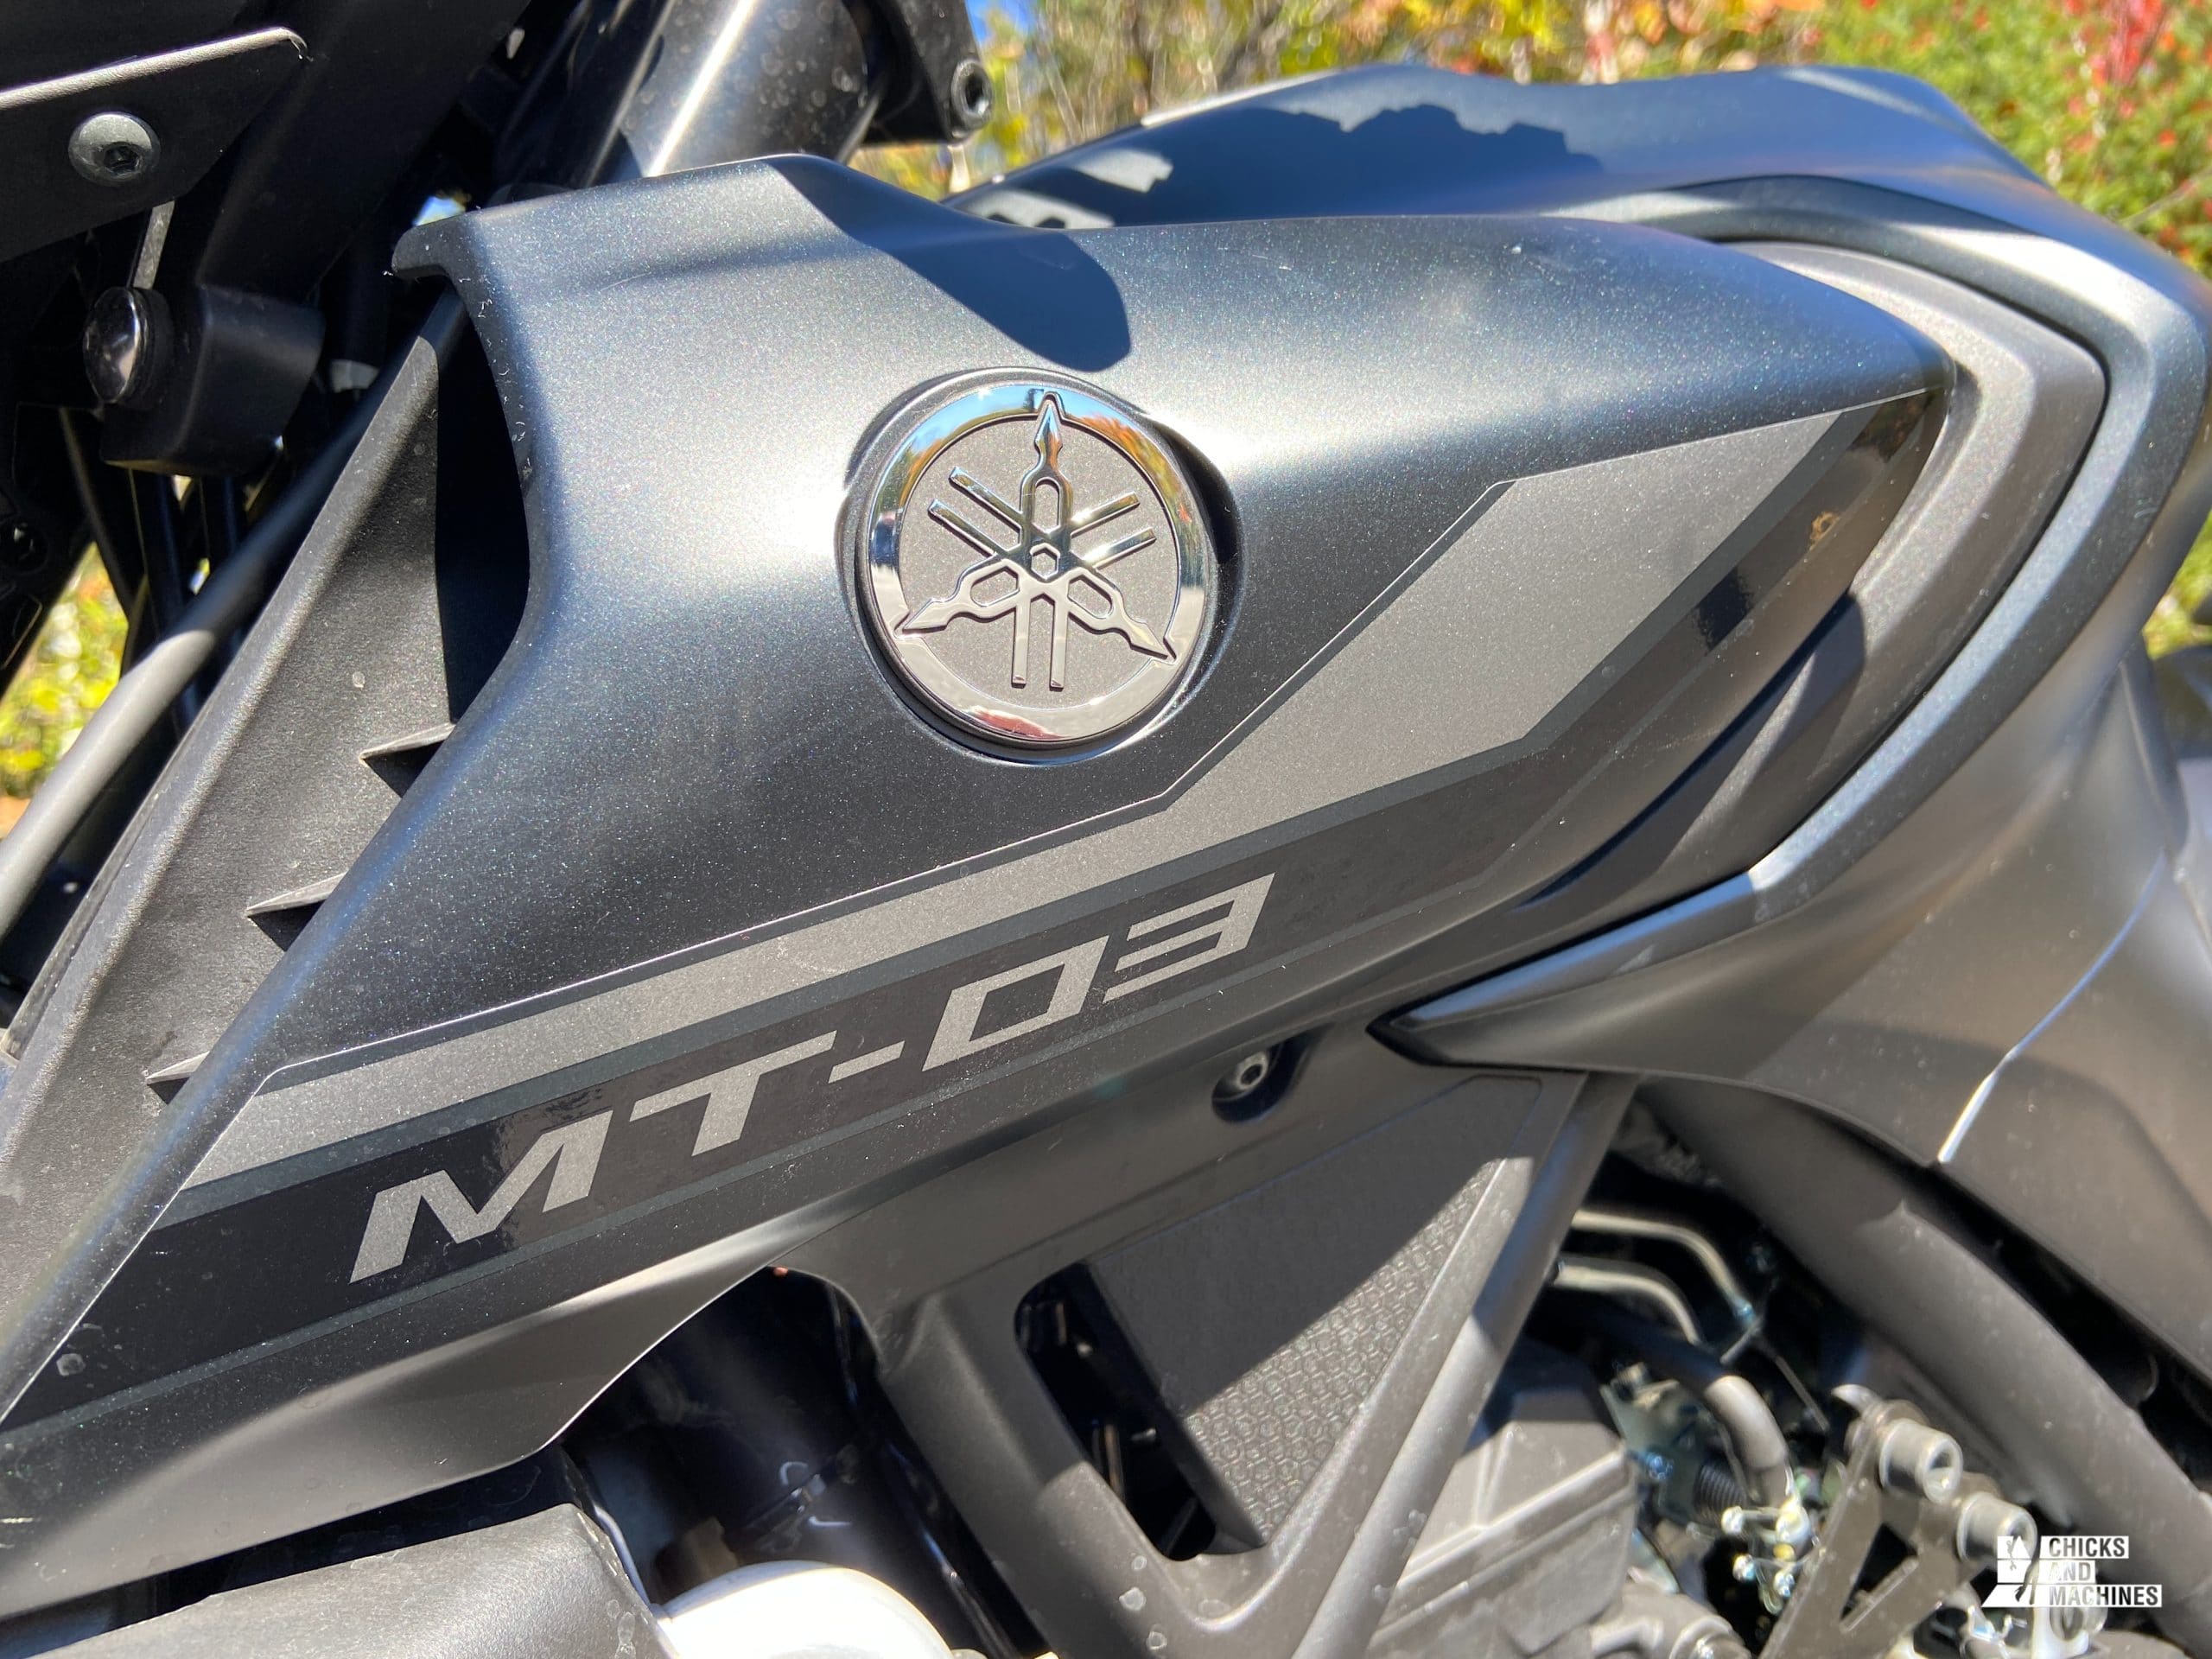 Details of the Yamaha MT-03 2021